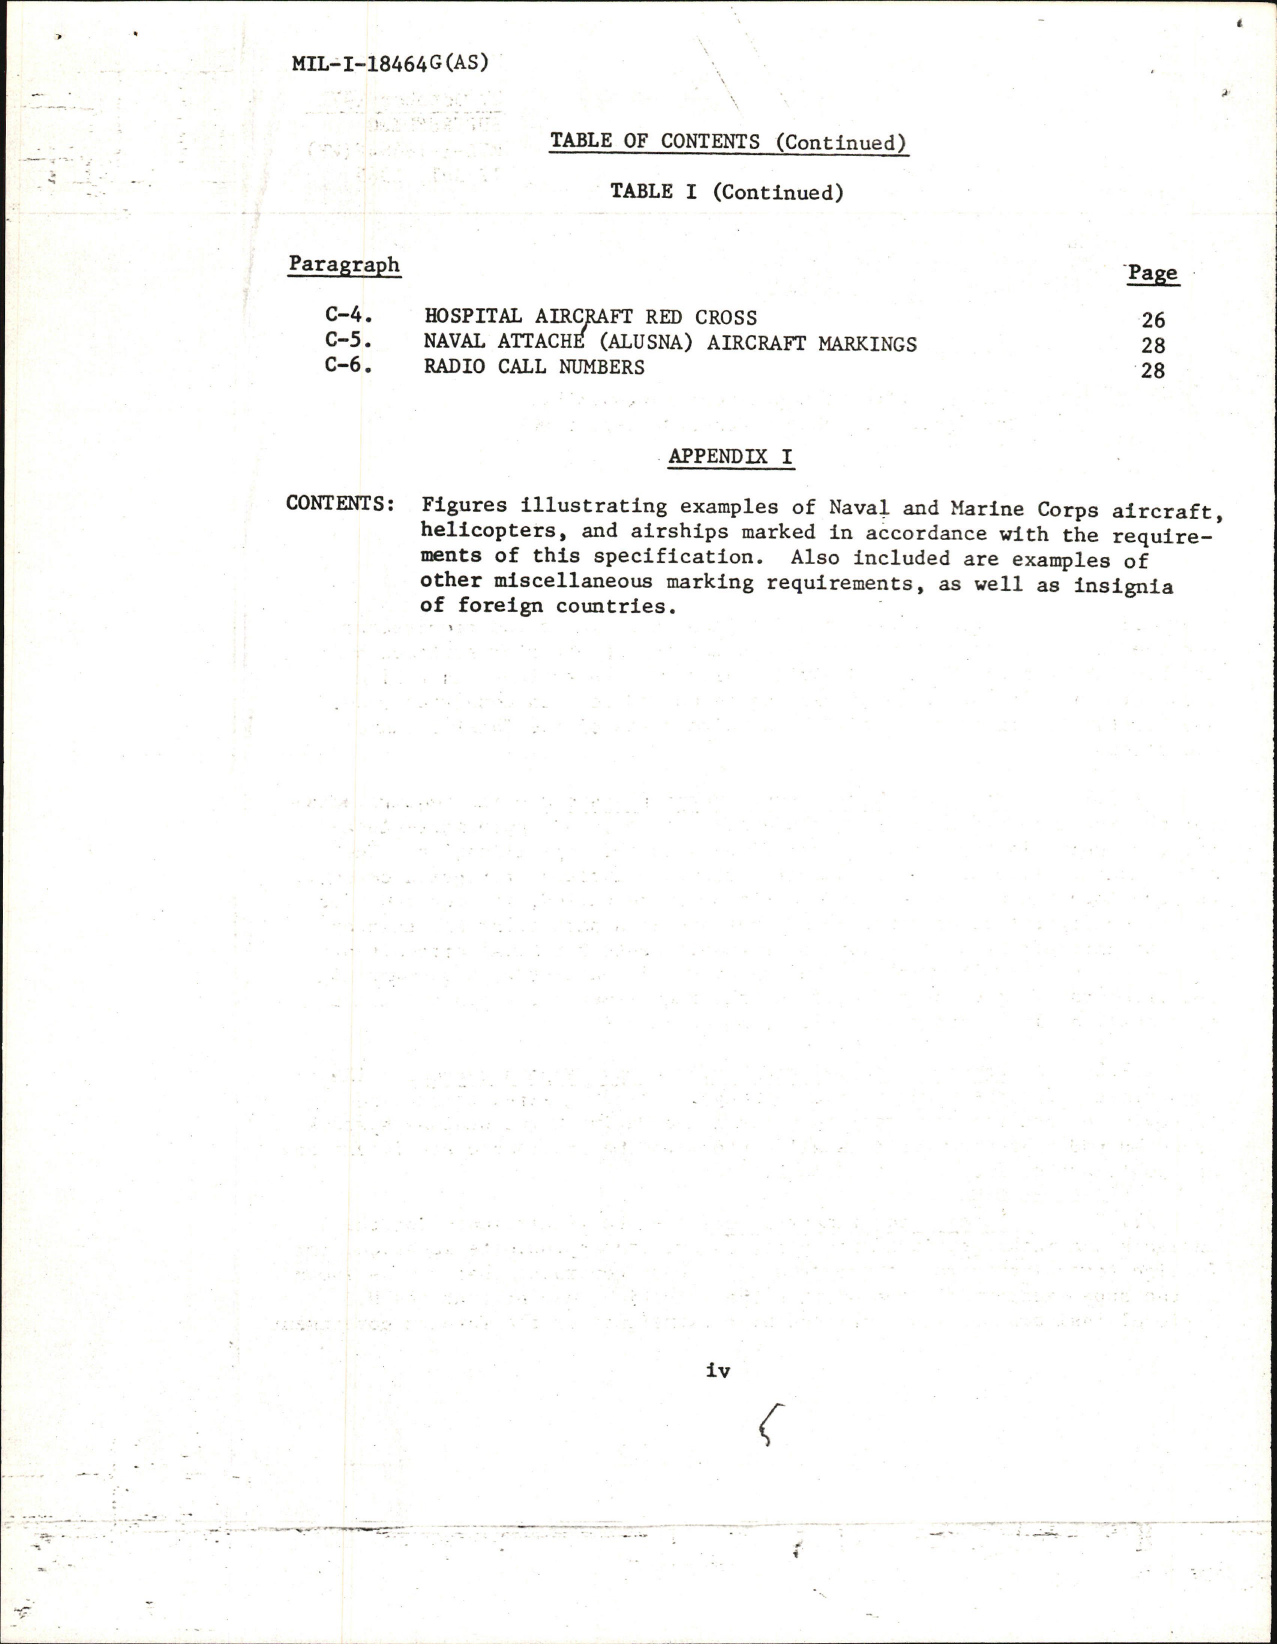 Sample page 7 from AirCorps Library document: Military Specifications for Insignia and Marking for Naval Weapons Systems 